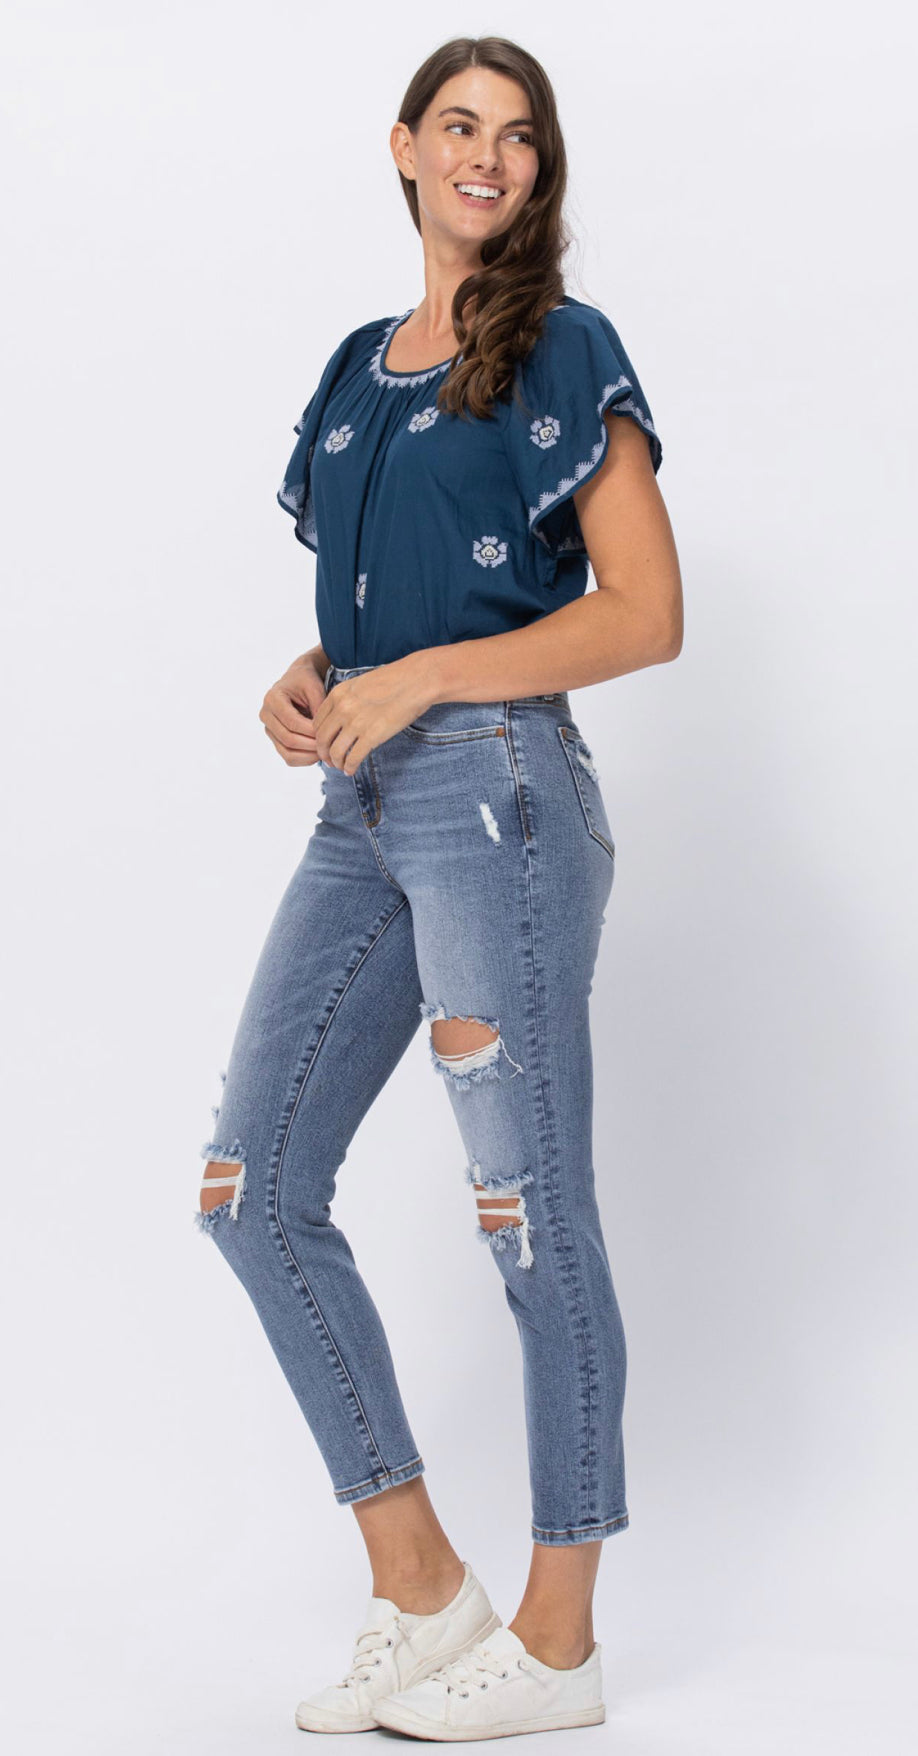 Judy Blue High Rise Destroyed Slim Fit Jean